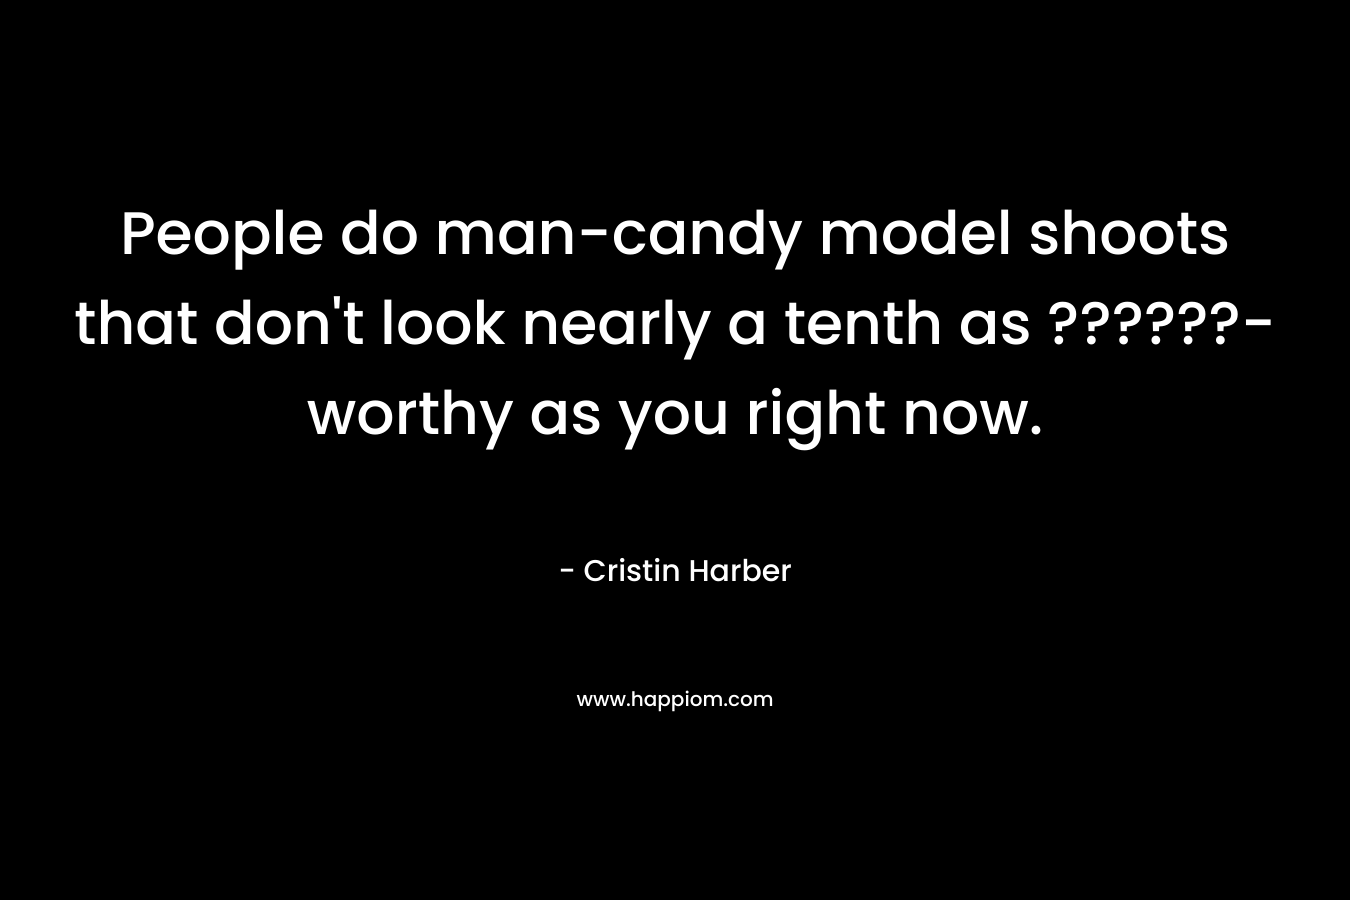 People do man-candy model shoots that don’t look nearly a tenth as ??????-worthy as you right now. – Cristin Harber